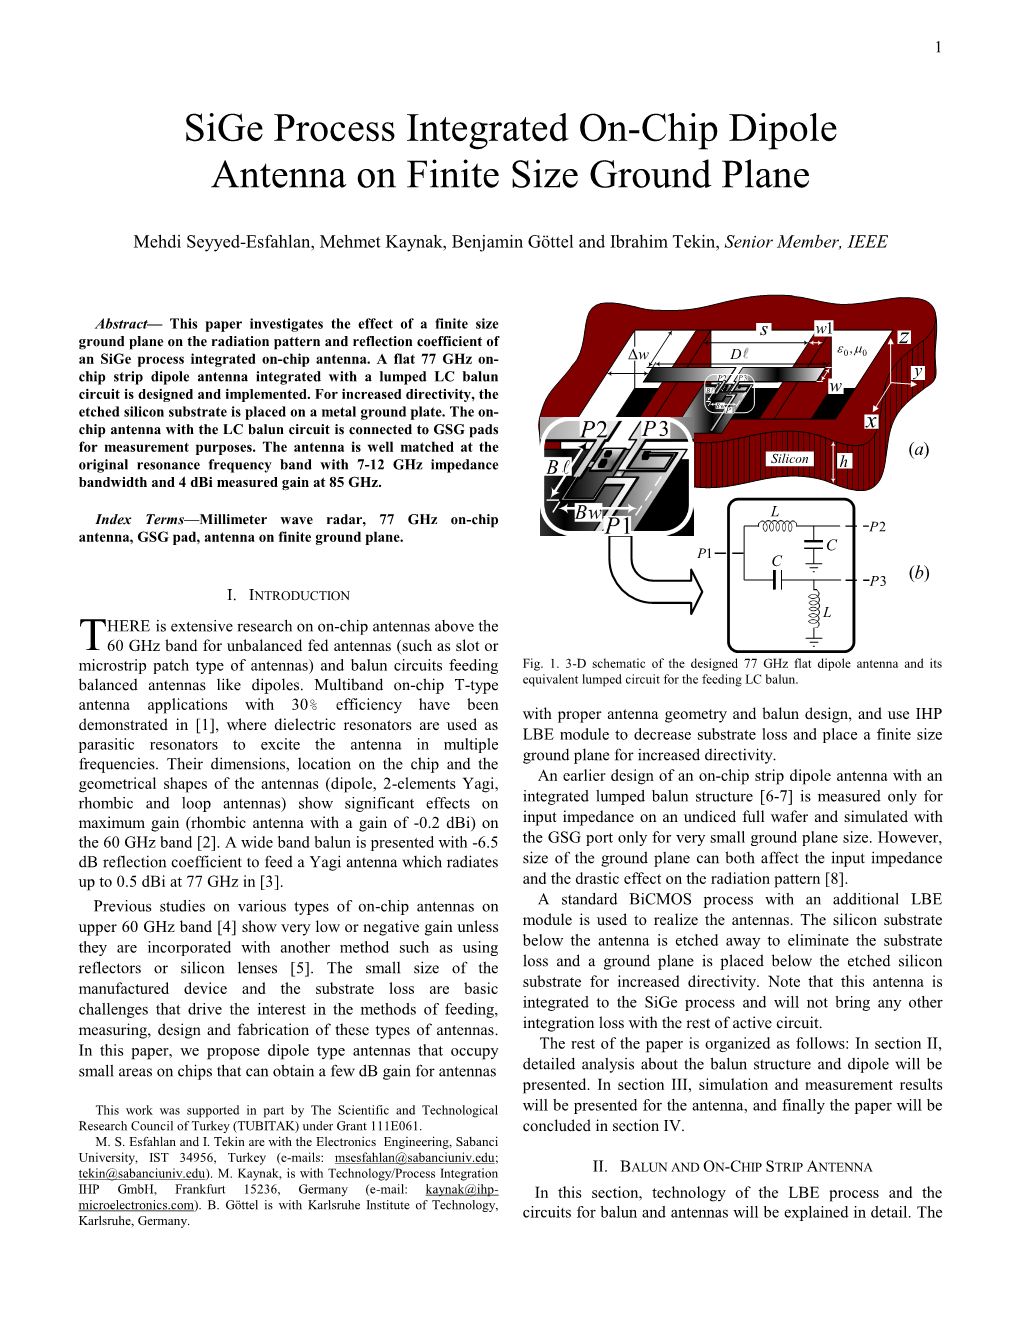 Sige Process Integrated On-Chip Dipole Antenna on Finite Size Ground Plane